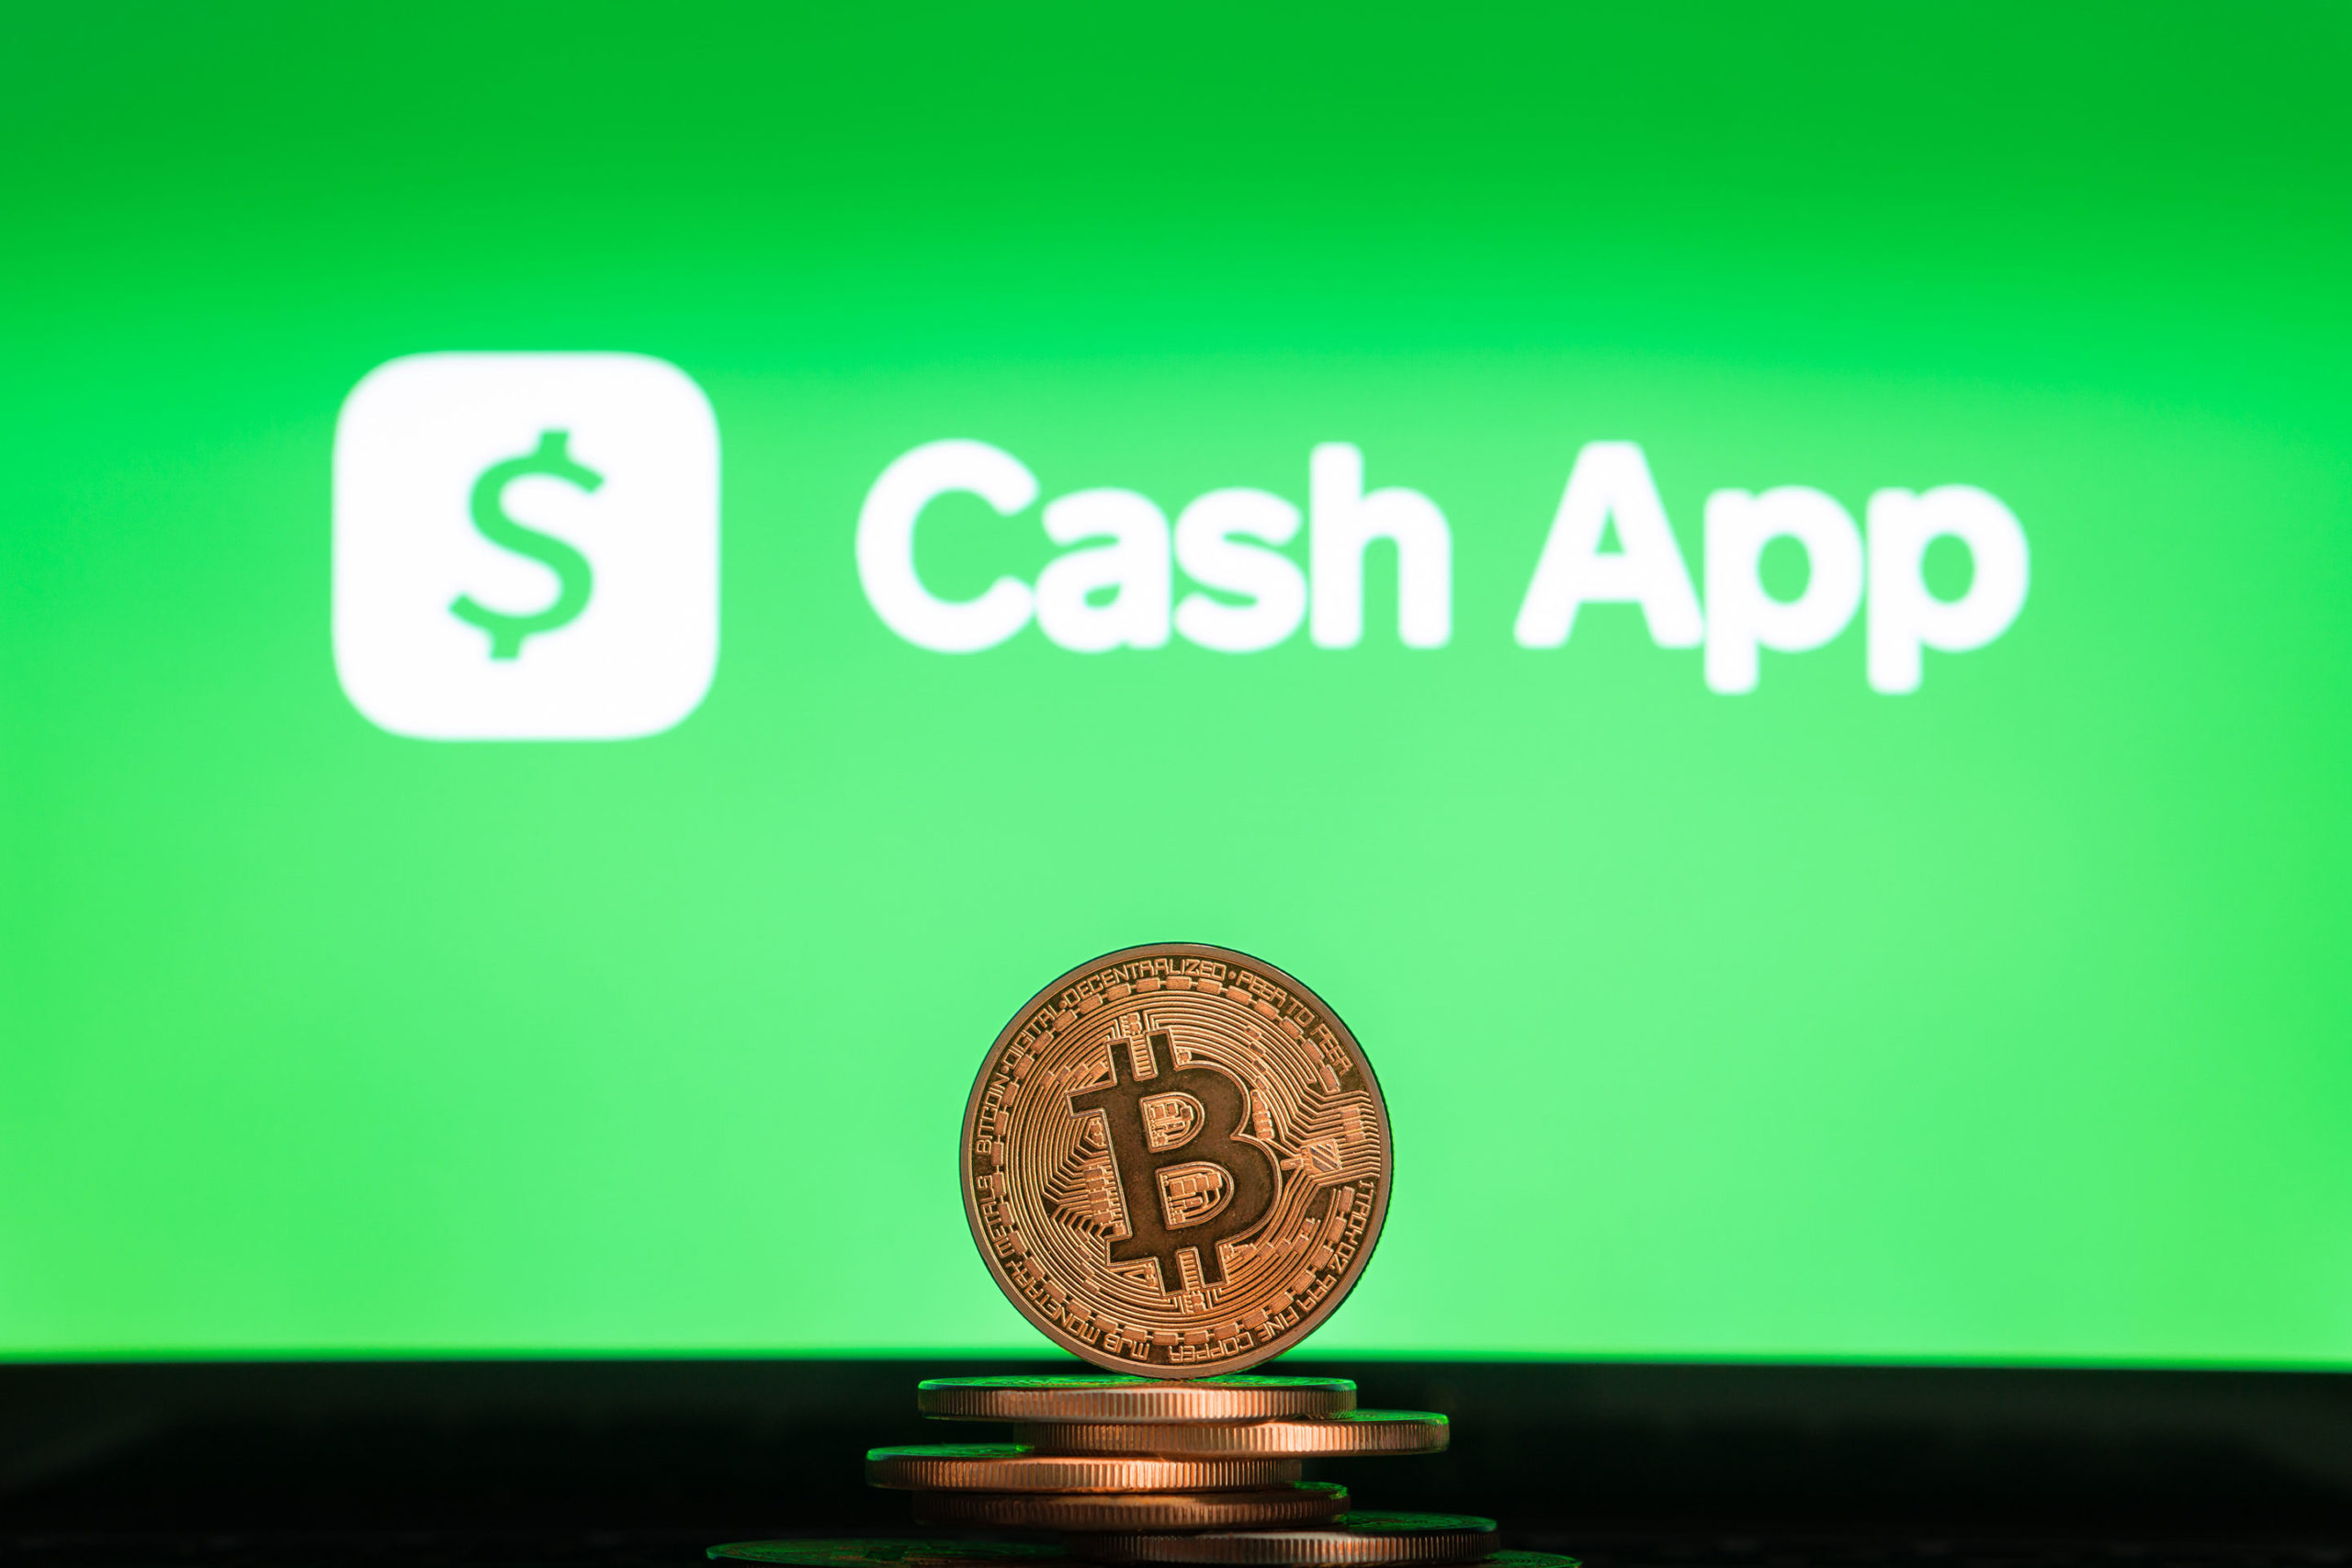 Cashapp Bitcoin Enabled & Direct Deposit Enable & Chime Bank linked (80% SUCCESS PAYMENTS)